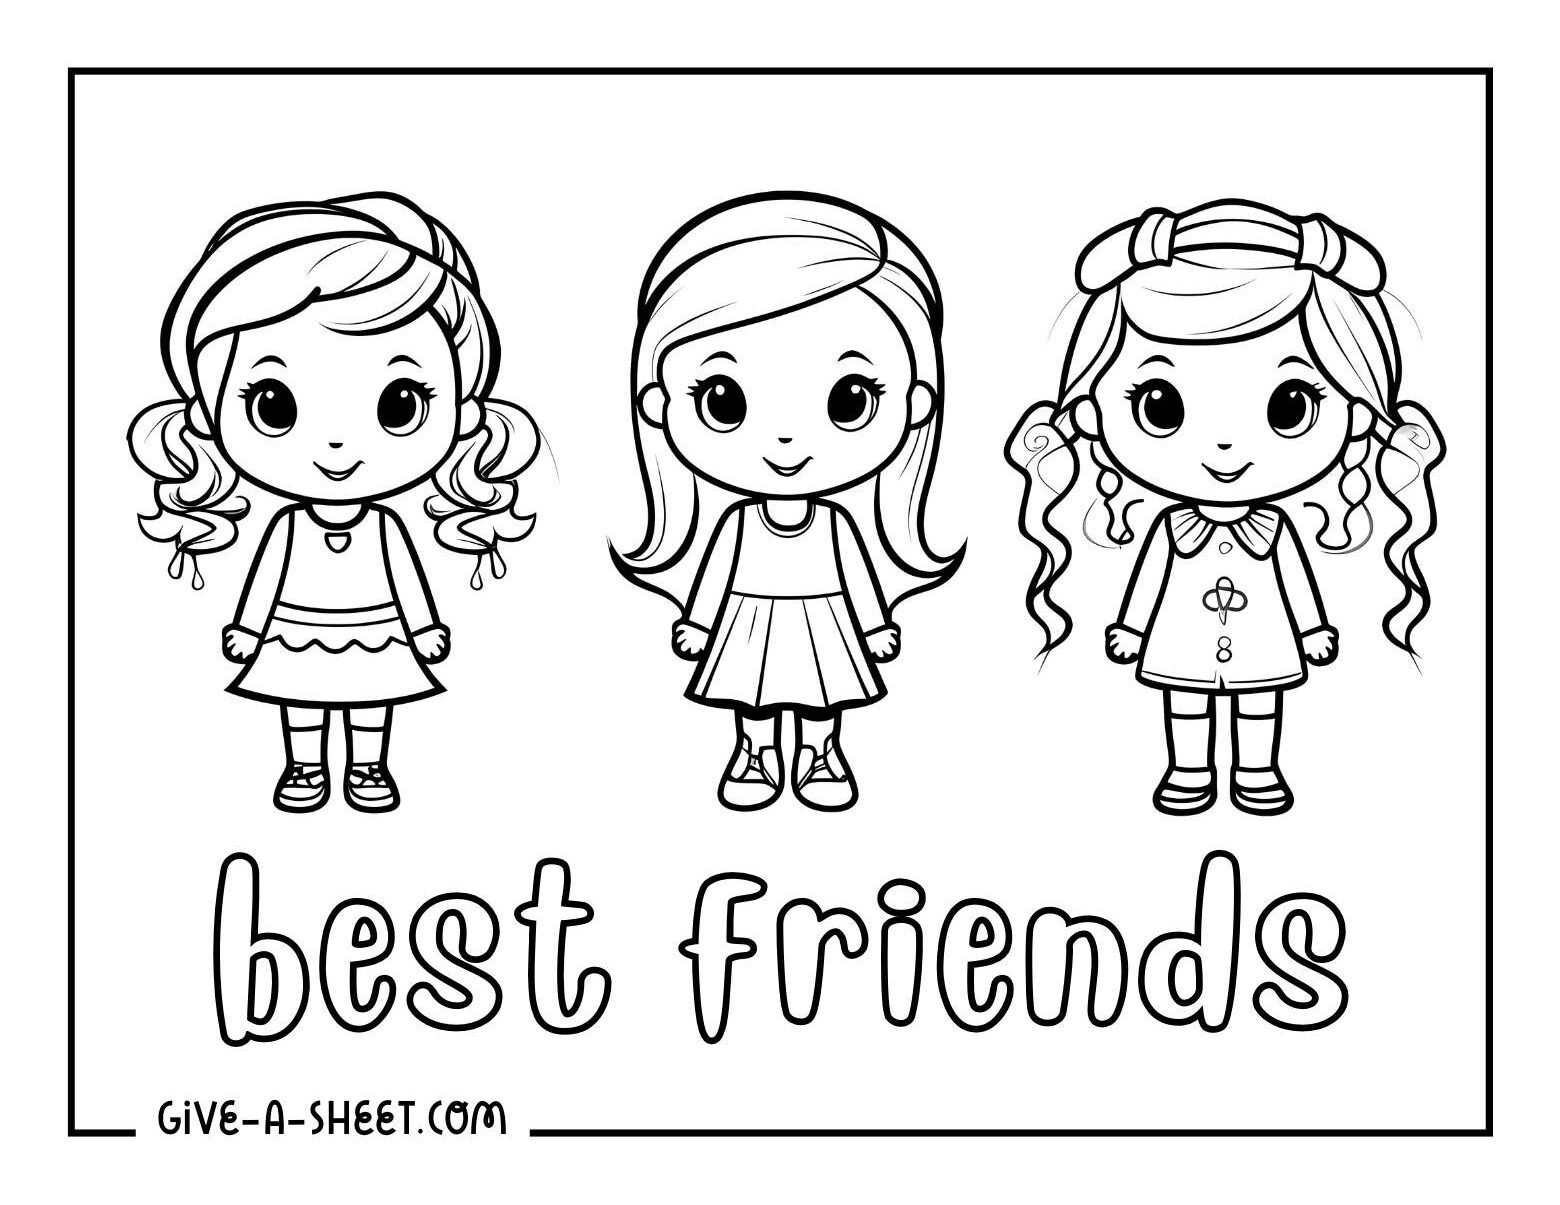 Simple best friends coloring sheet for kids.